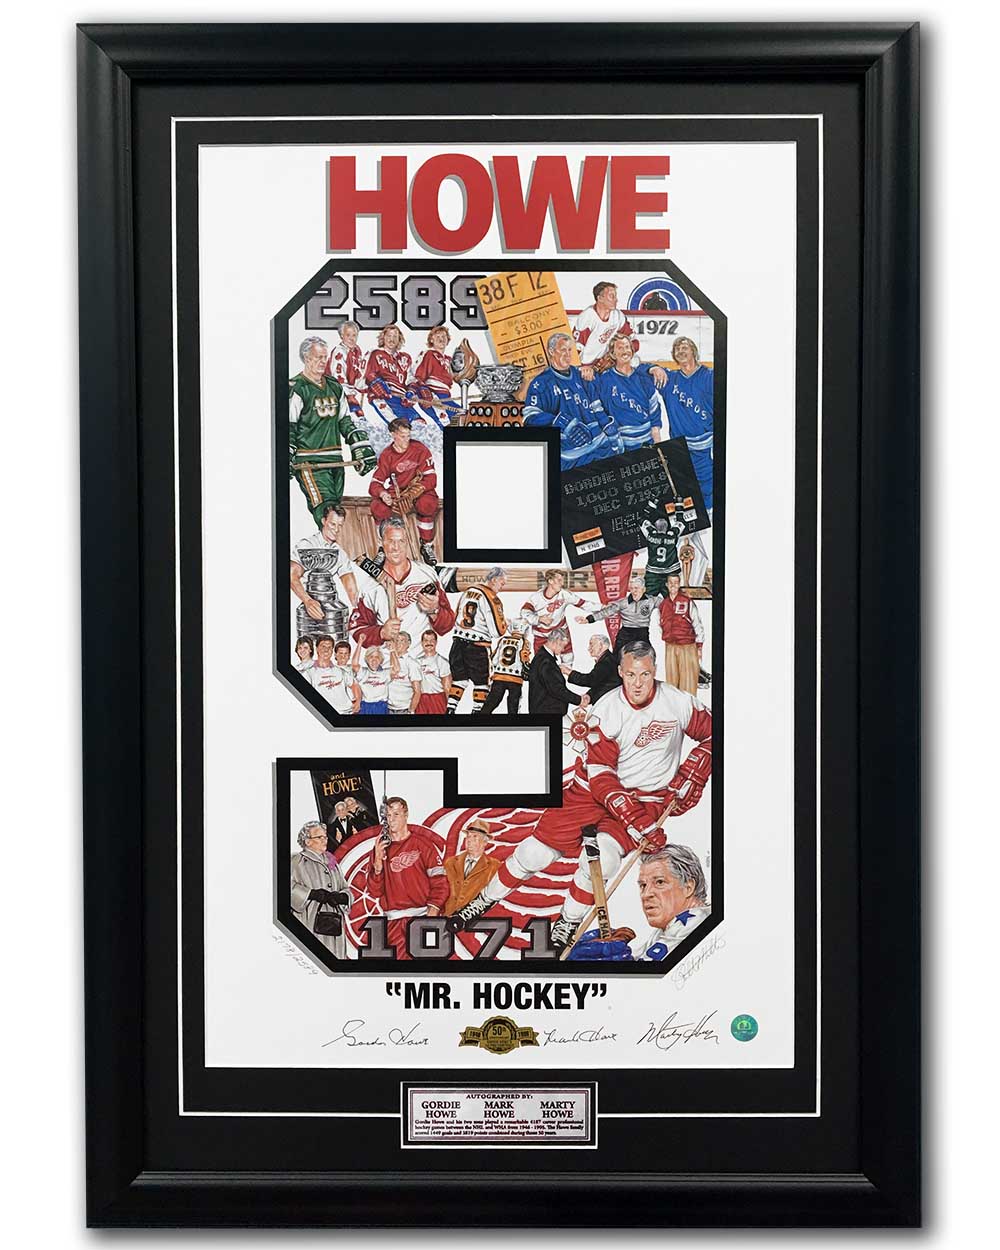 Gordie, Mark and Marty Howe Family Signed Mr Hockey Art Collage 23x33 Frame